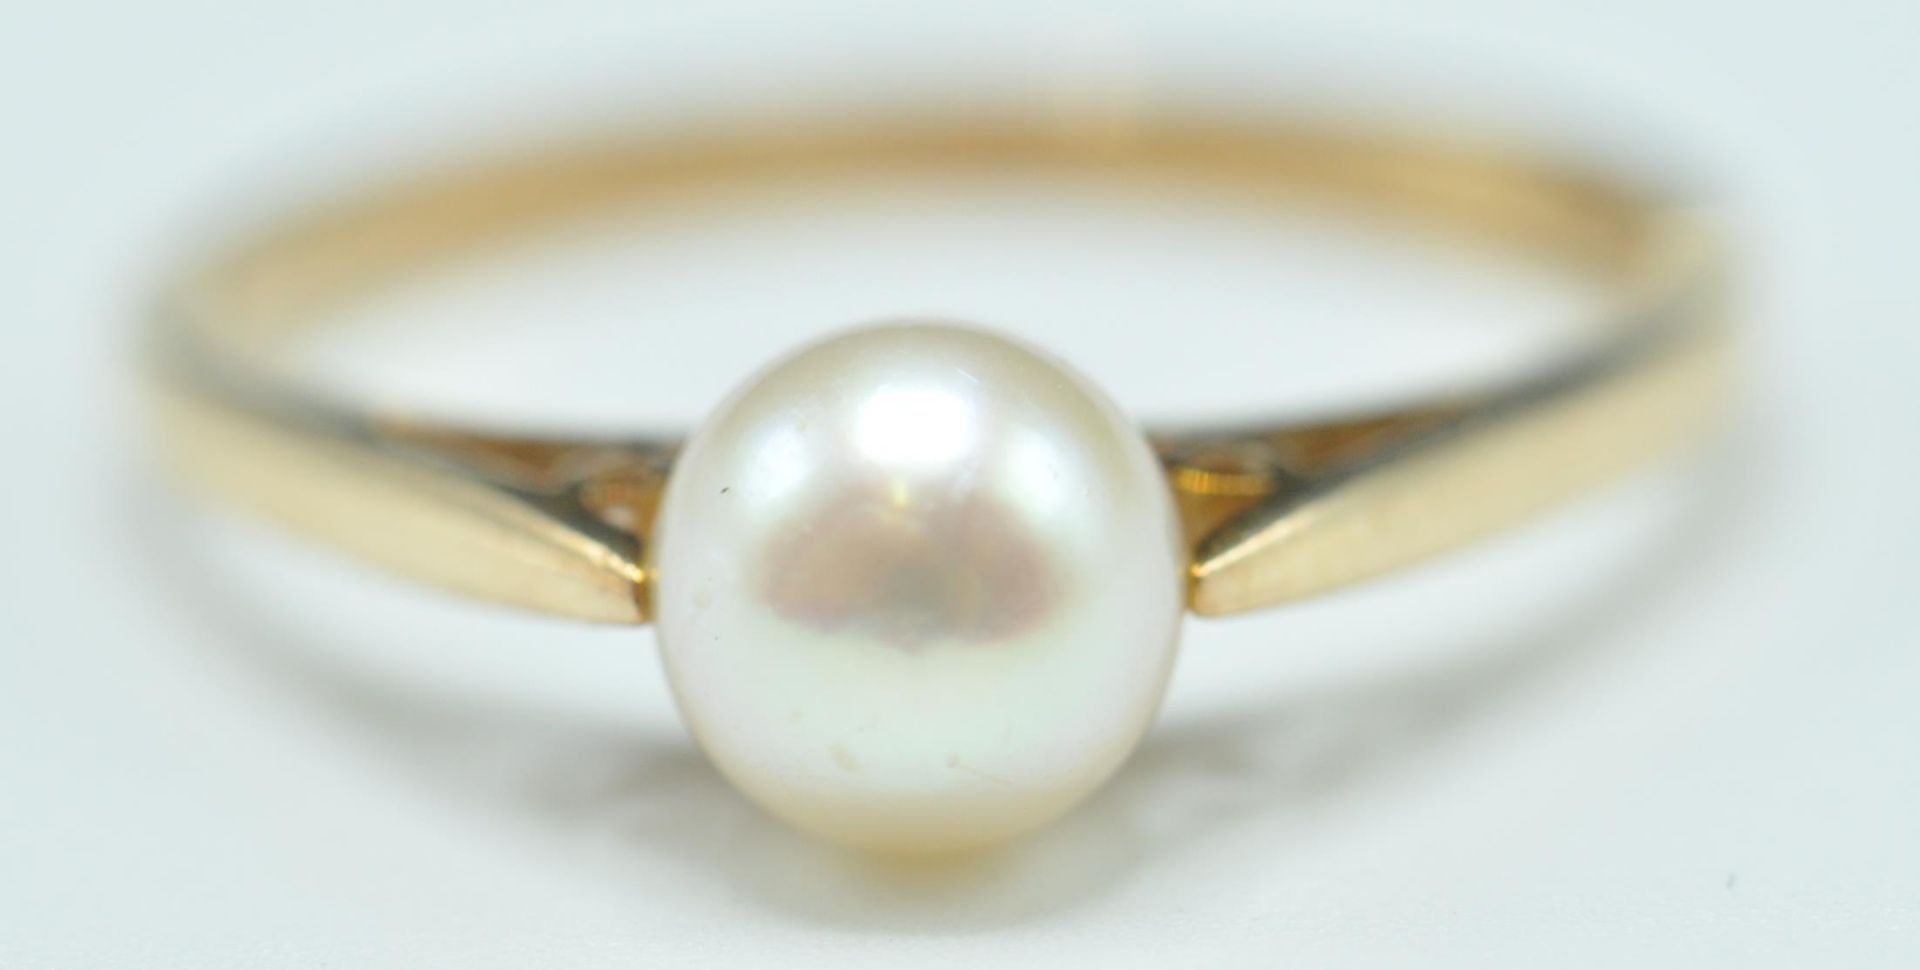 9CT GOLD AND SINGLE PEARL HALLMARKED RING - Image 2 of 6